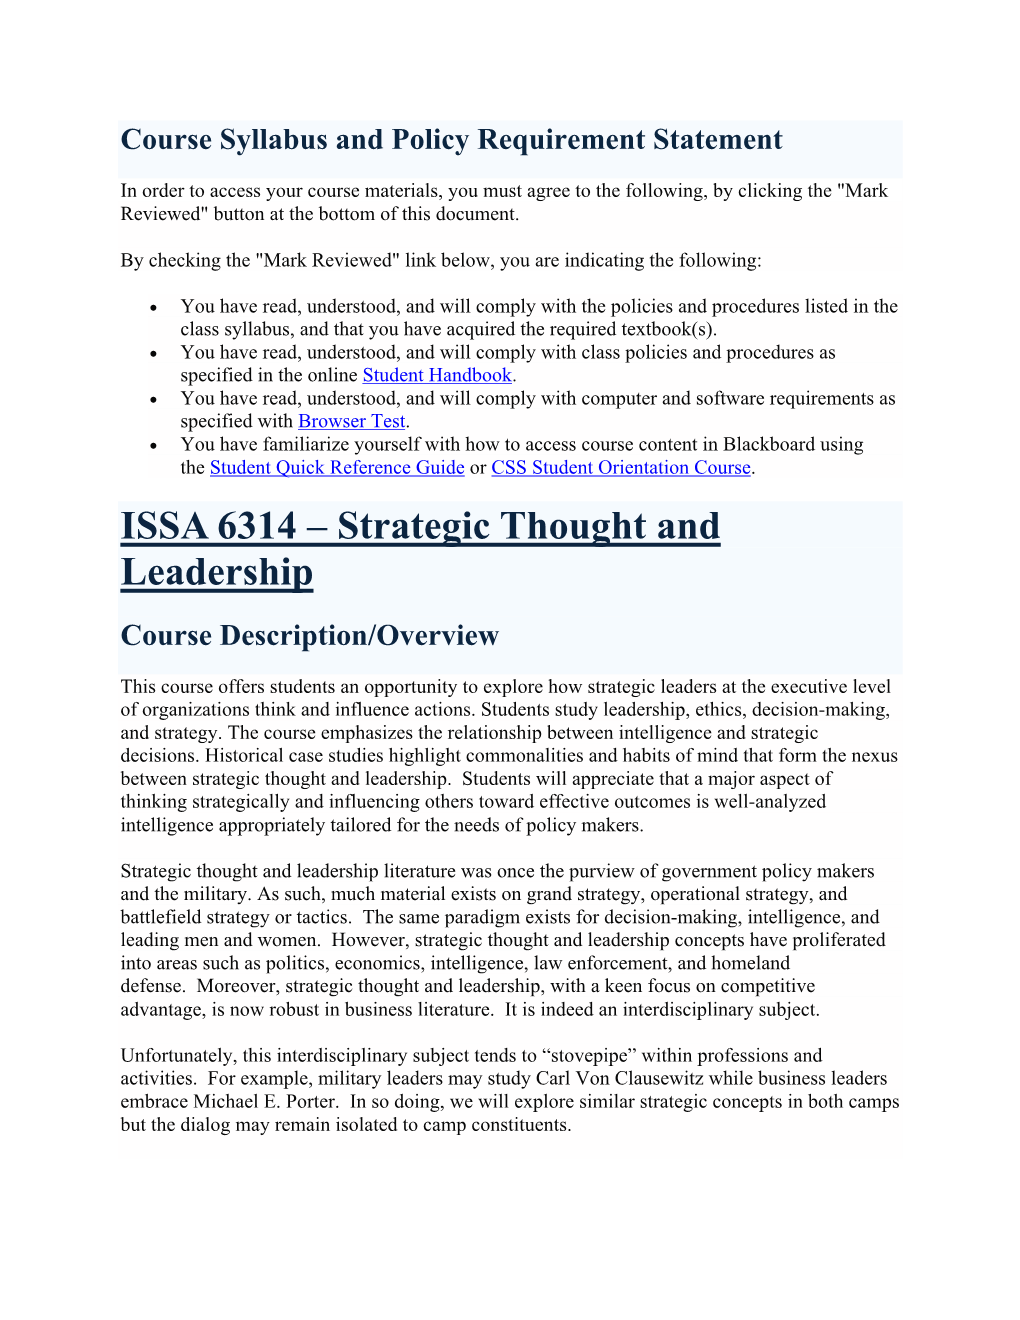 Strategic Thought and Leadership Course Description/Overview